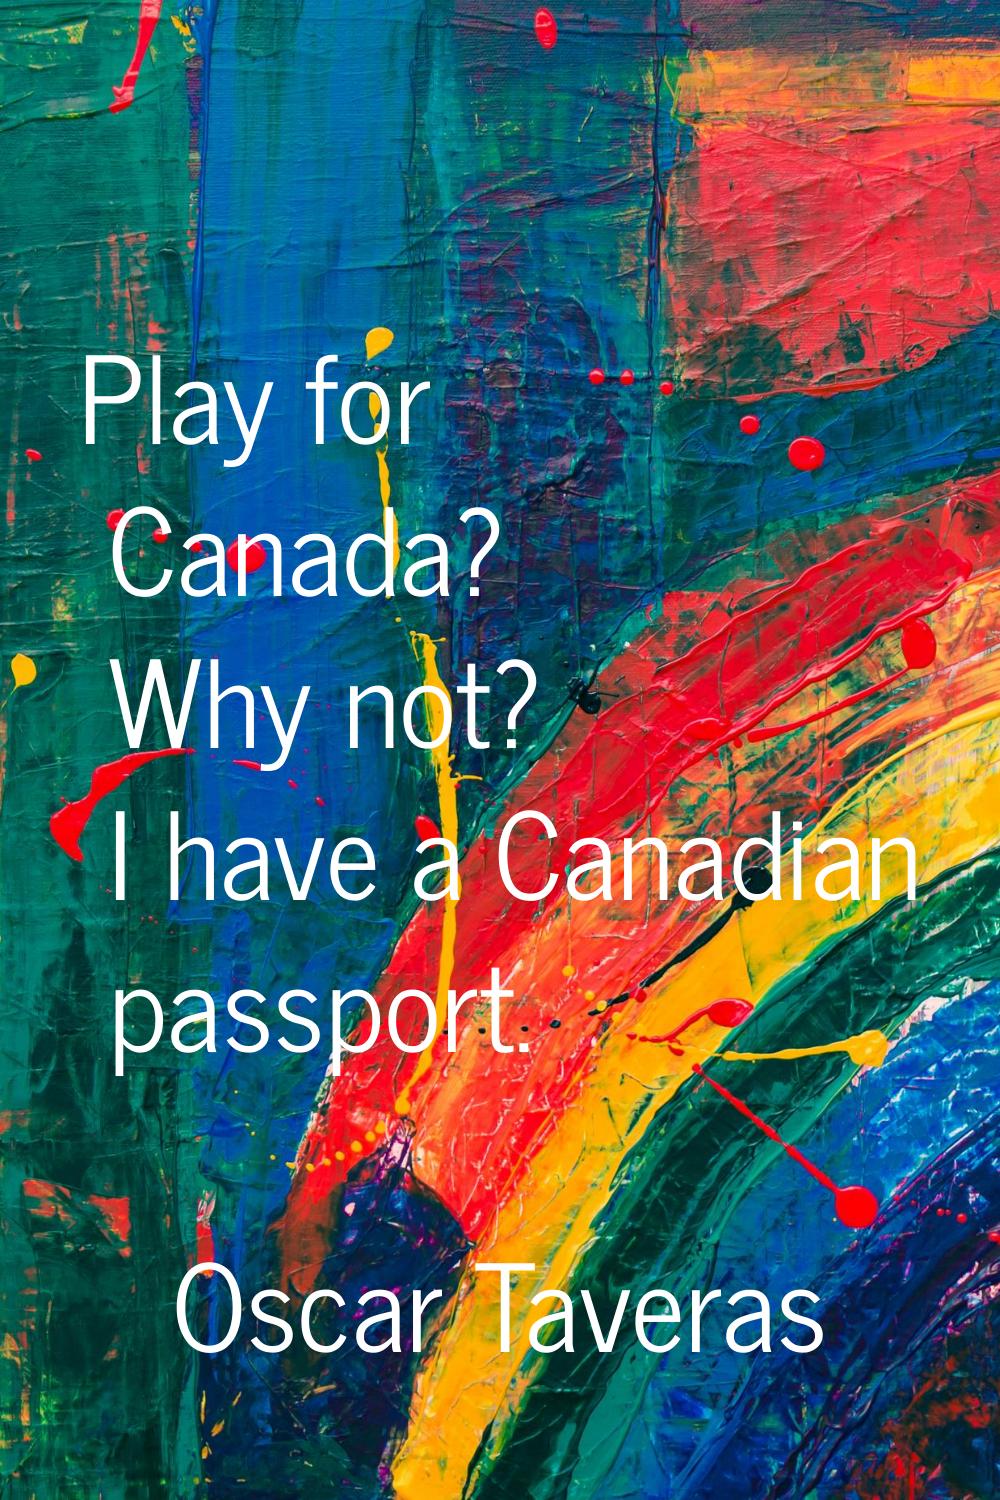 Play for Canada? Why not? I have a Canadian passport.